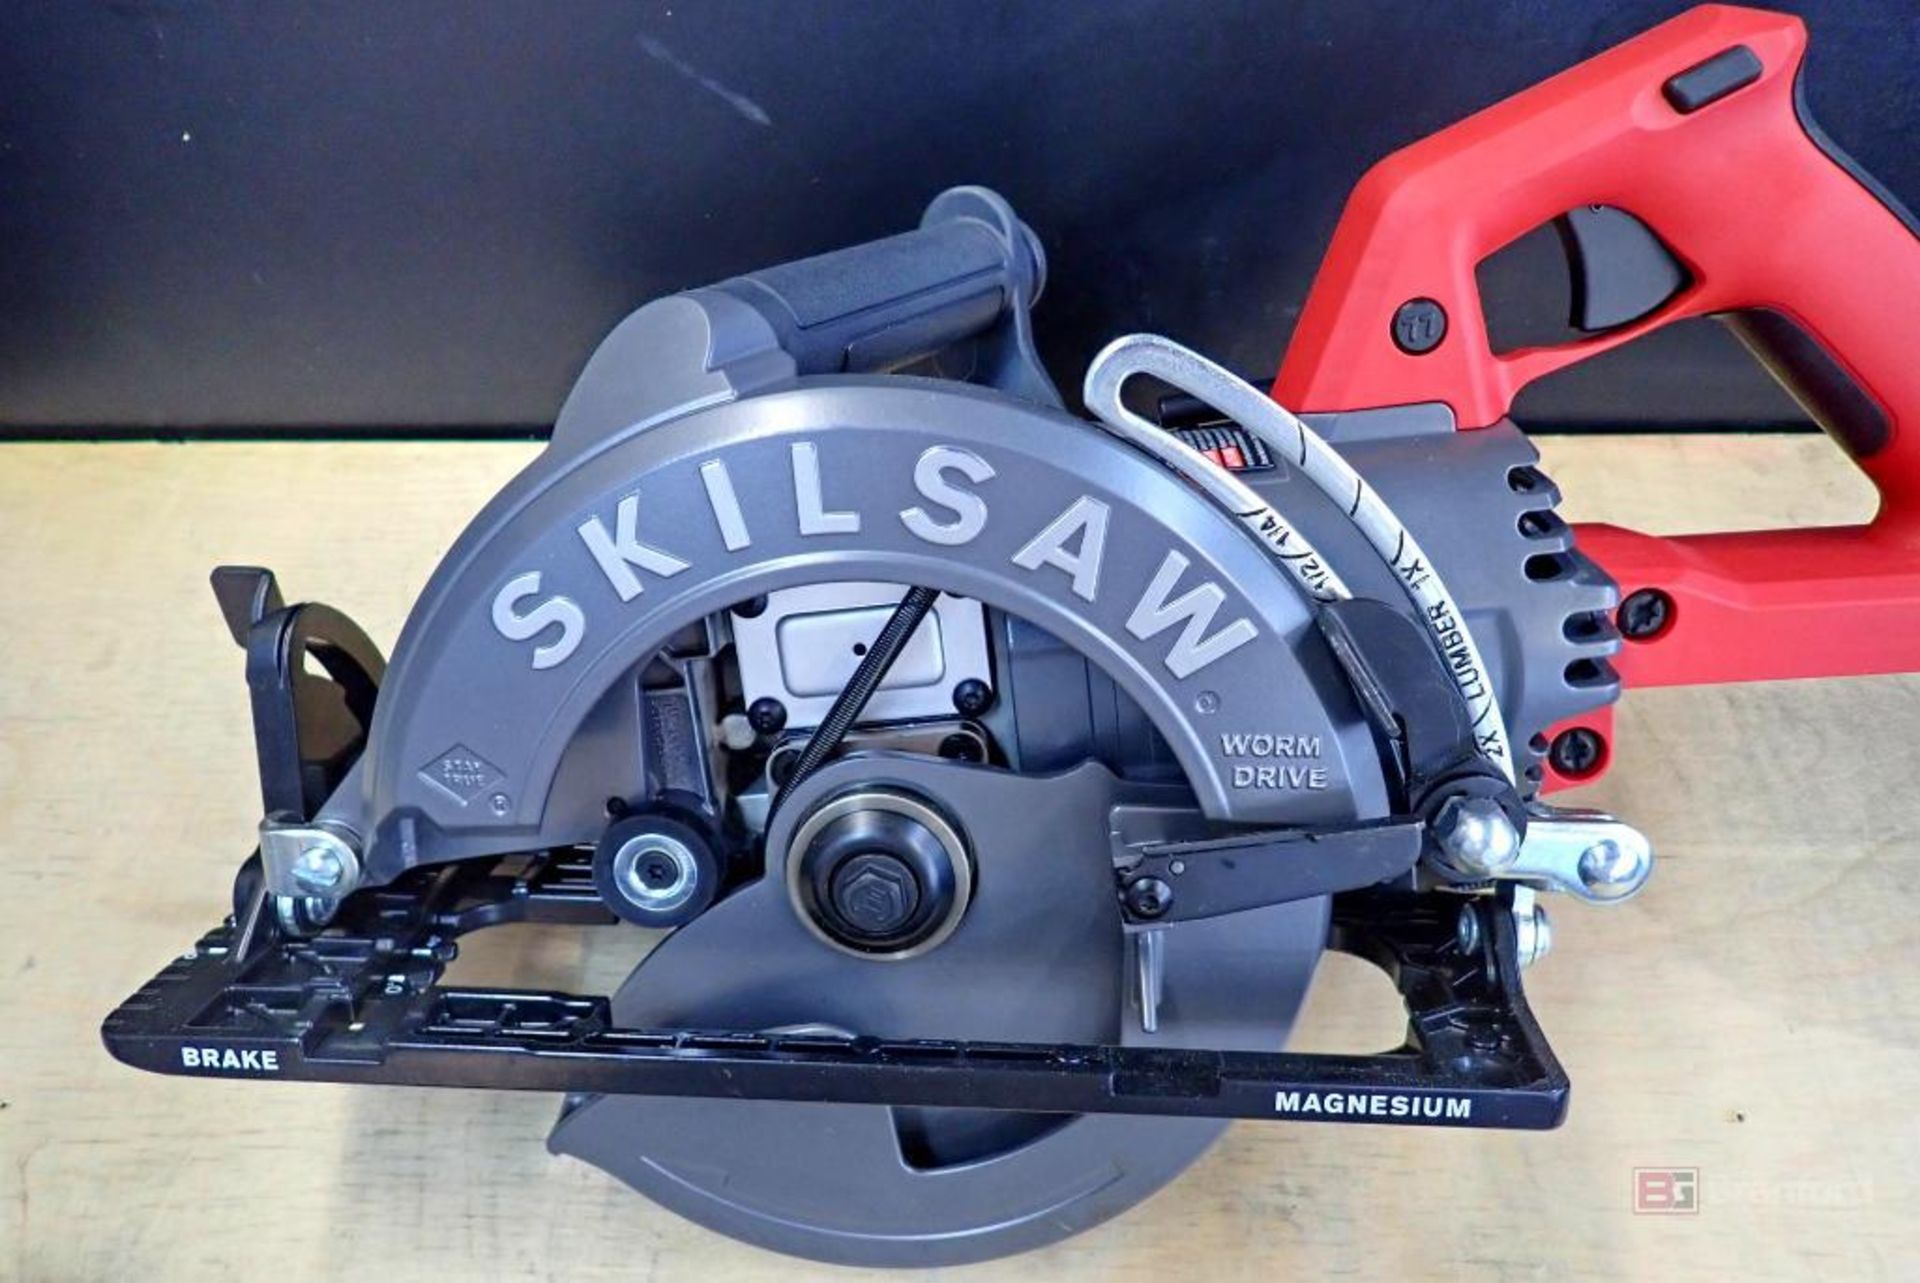 SKILSAW SPTH77 M-12 Cordless Worm Drive 7-1/4" Saw - Image 5 of 10